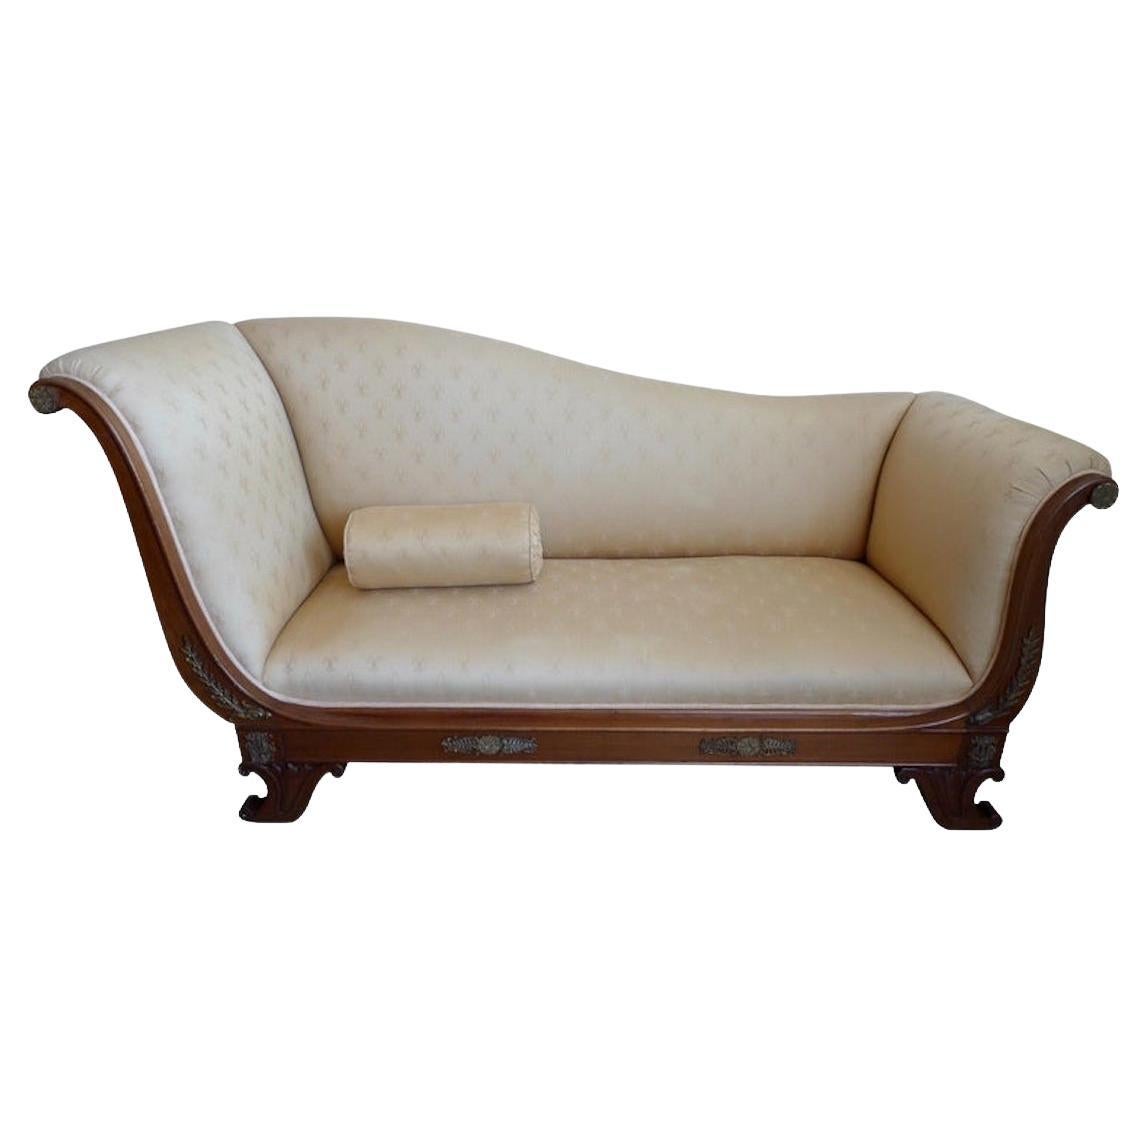 French xix Empire Walnut Chaise Lounge Reupholstered with Vintage Fabric